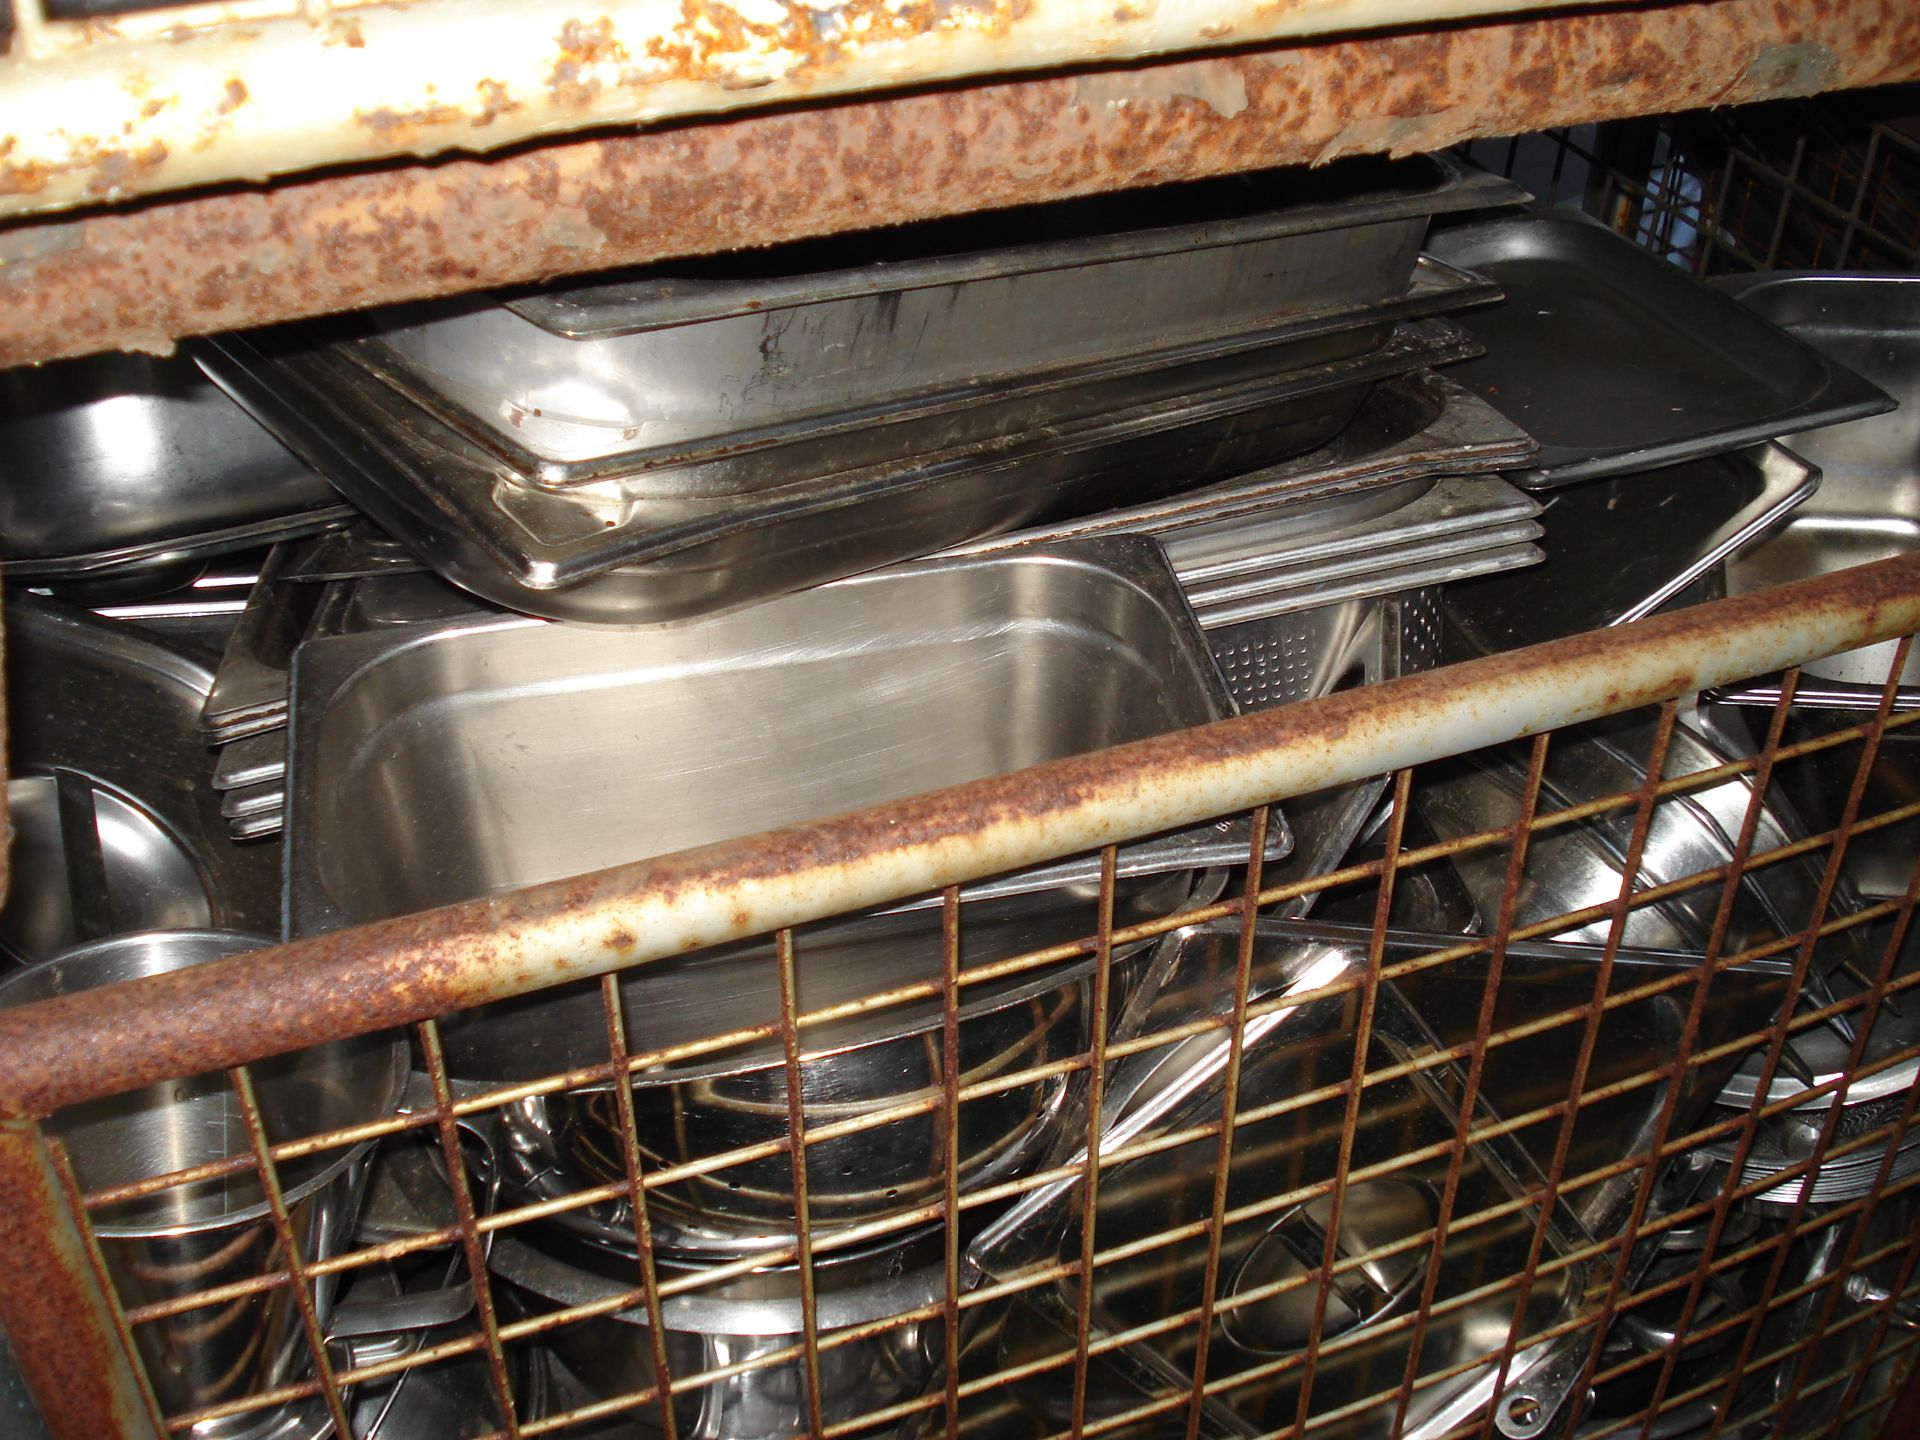 MIXED COMMERCIAL GRADE COOKING TRAYS/SAUCEPANS AND BAIN MARIE POTS - MIXED CONDITION - STORAGE MEDIA - Image 2 of 3